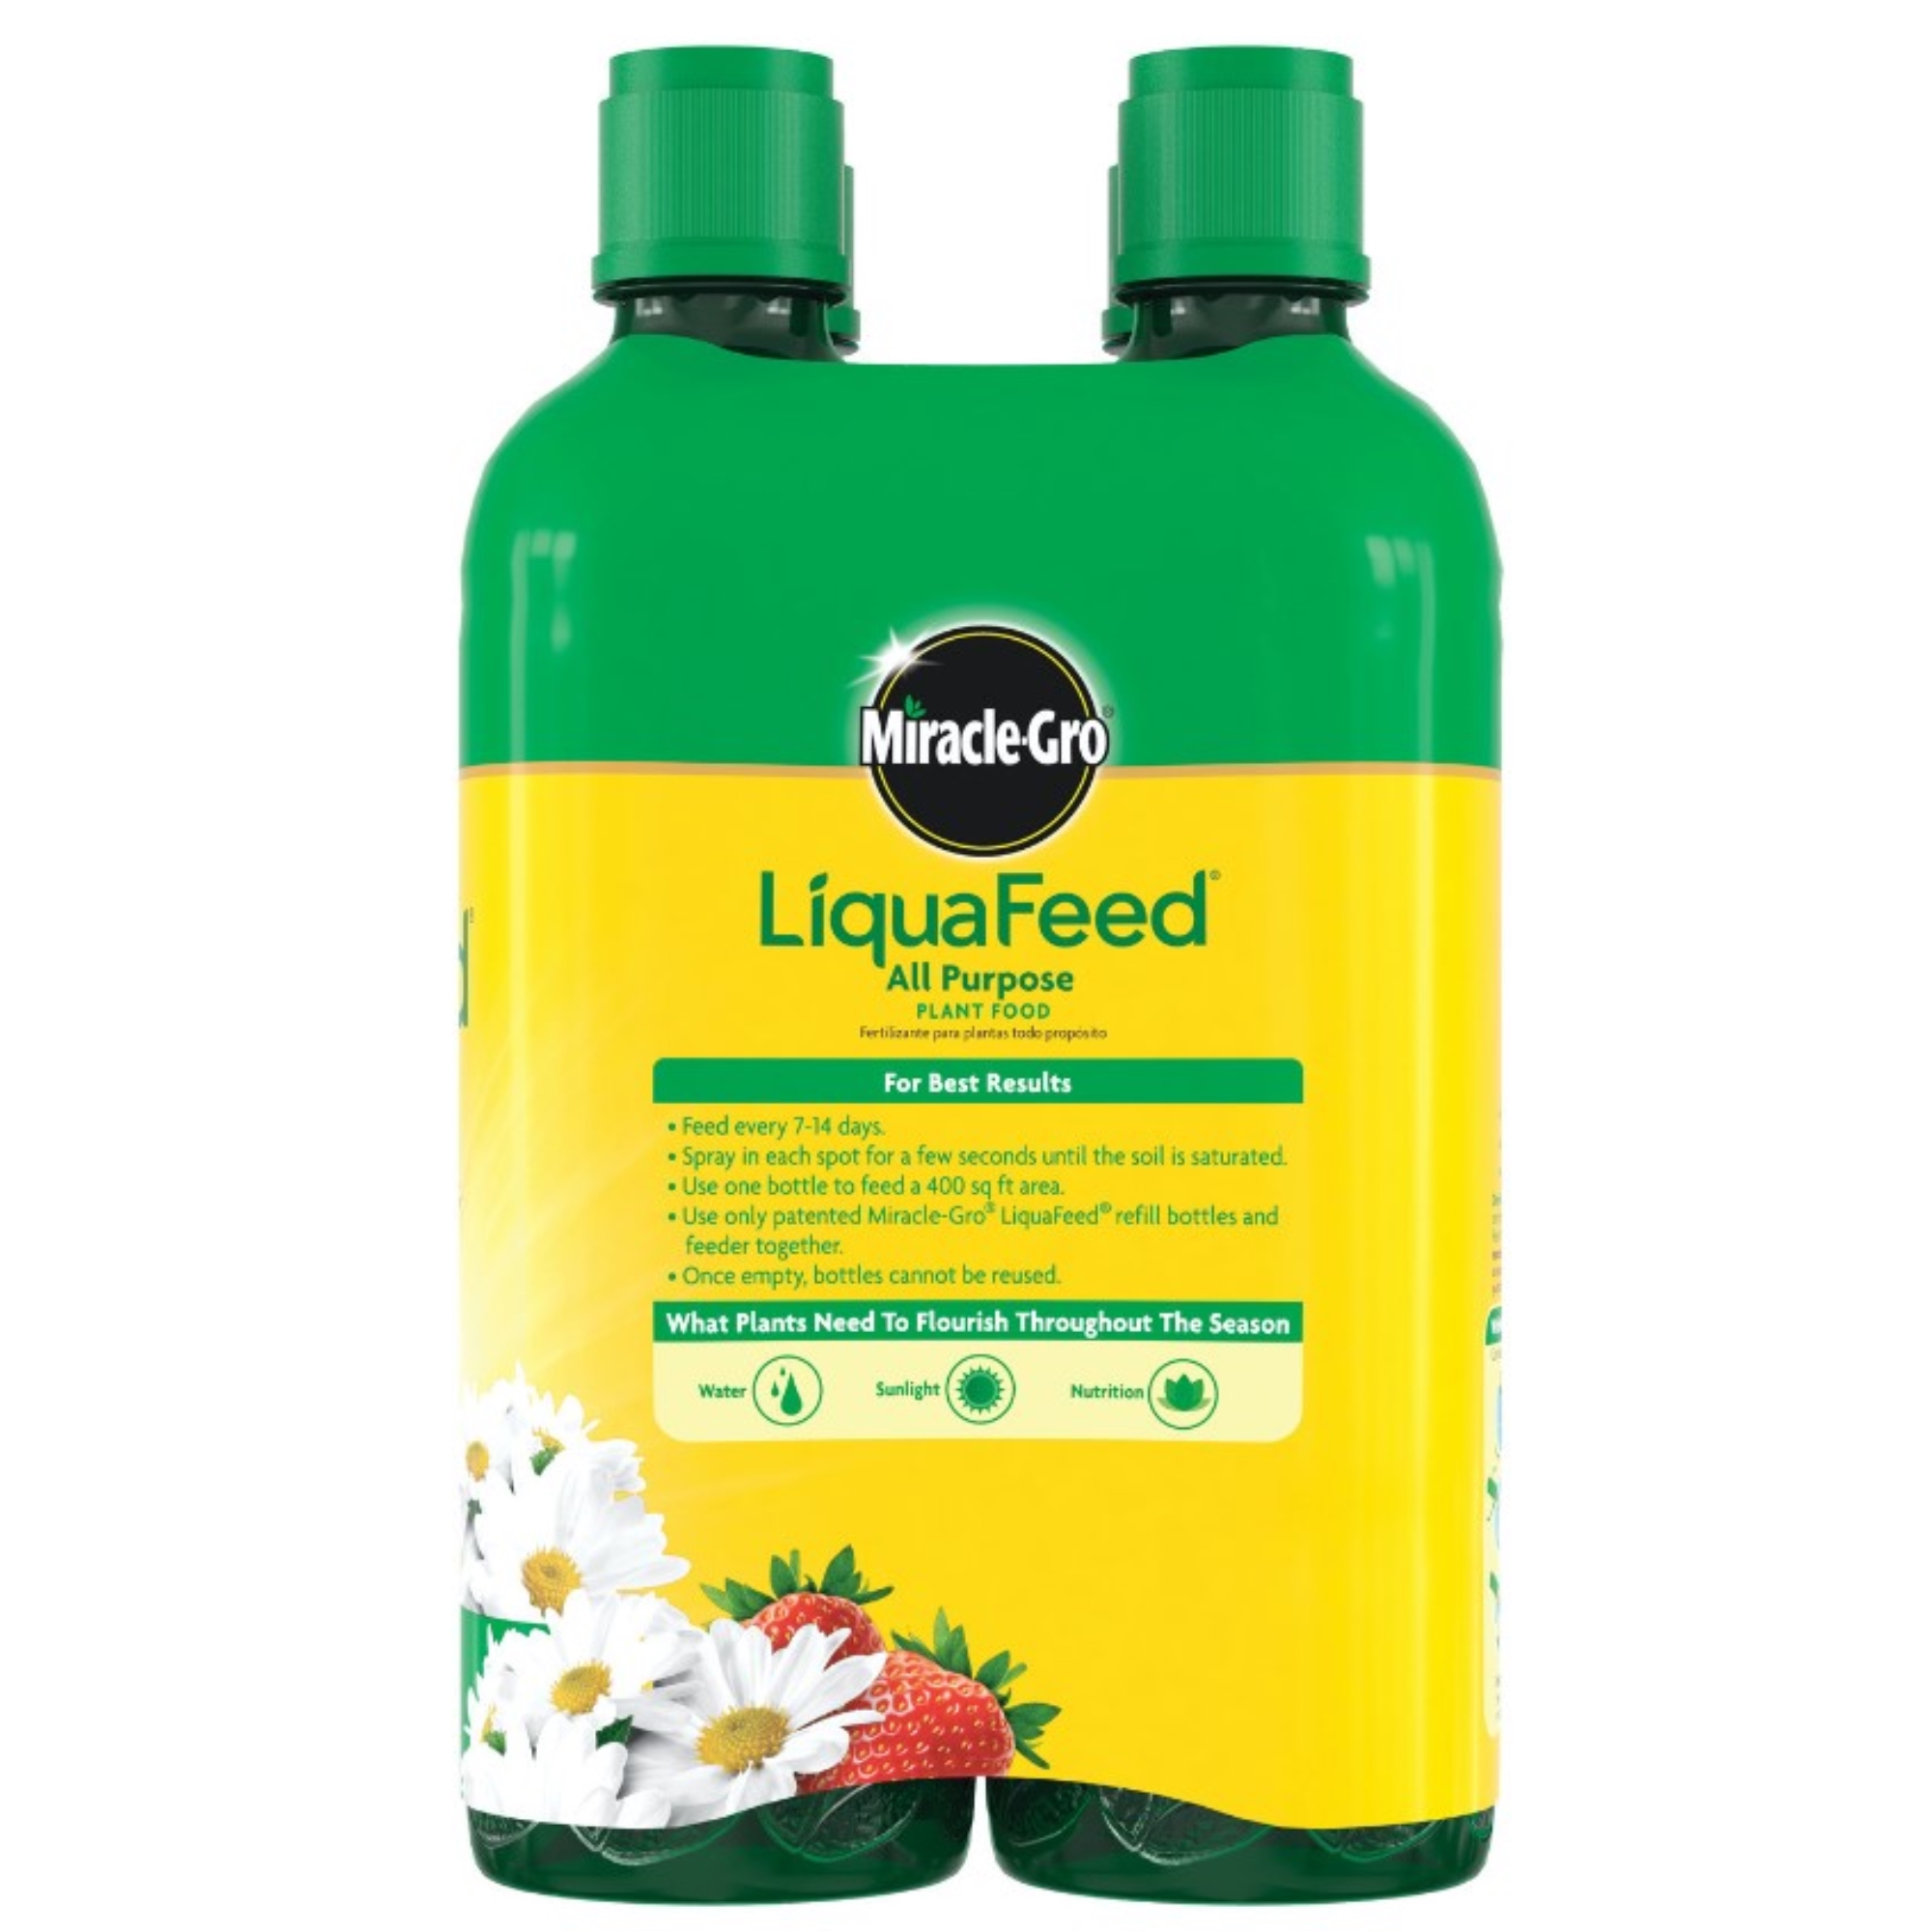 Miracle-Gro Liquafeed All Purpose Plant Food, 4-Pack Refills, 16 fl. oz. - image 5 of 9